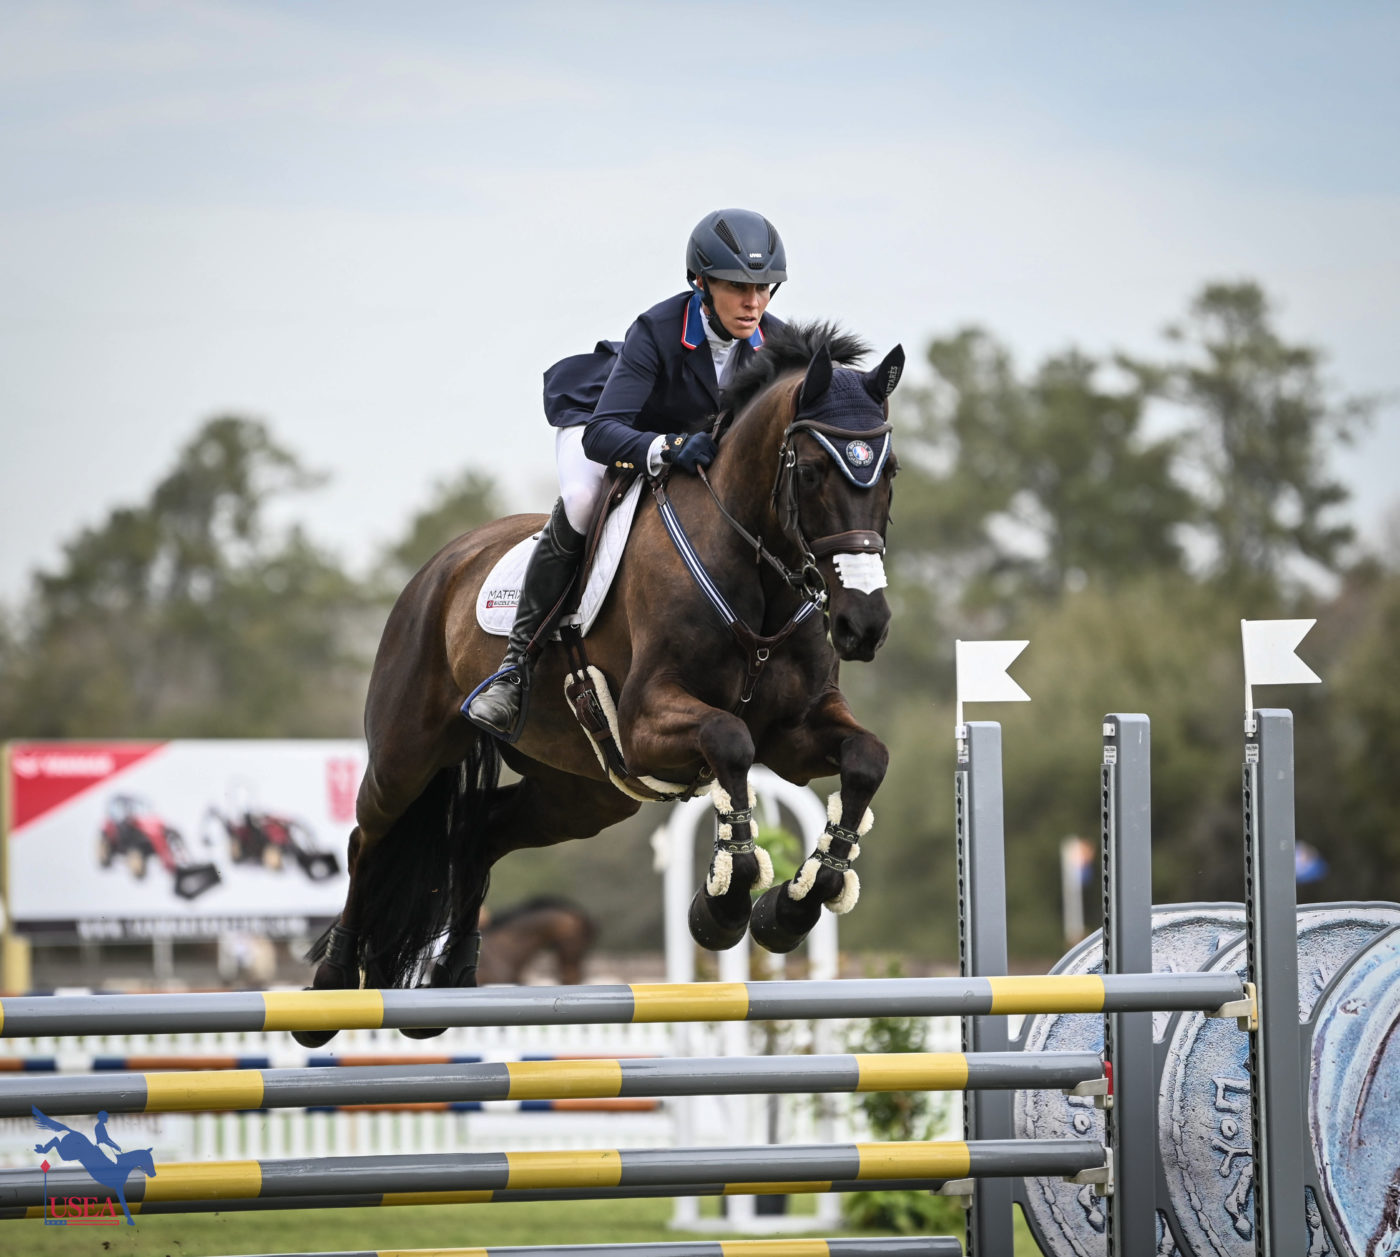 Liz Halliday-Sharp and Cooley Nutcracker are in second place in the CCI3*-S. USEA/Lindsay Berreth photo